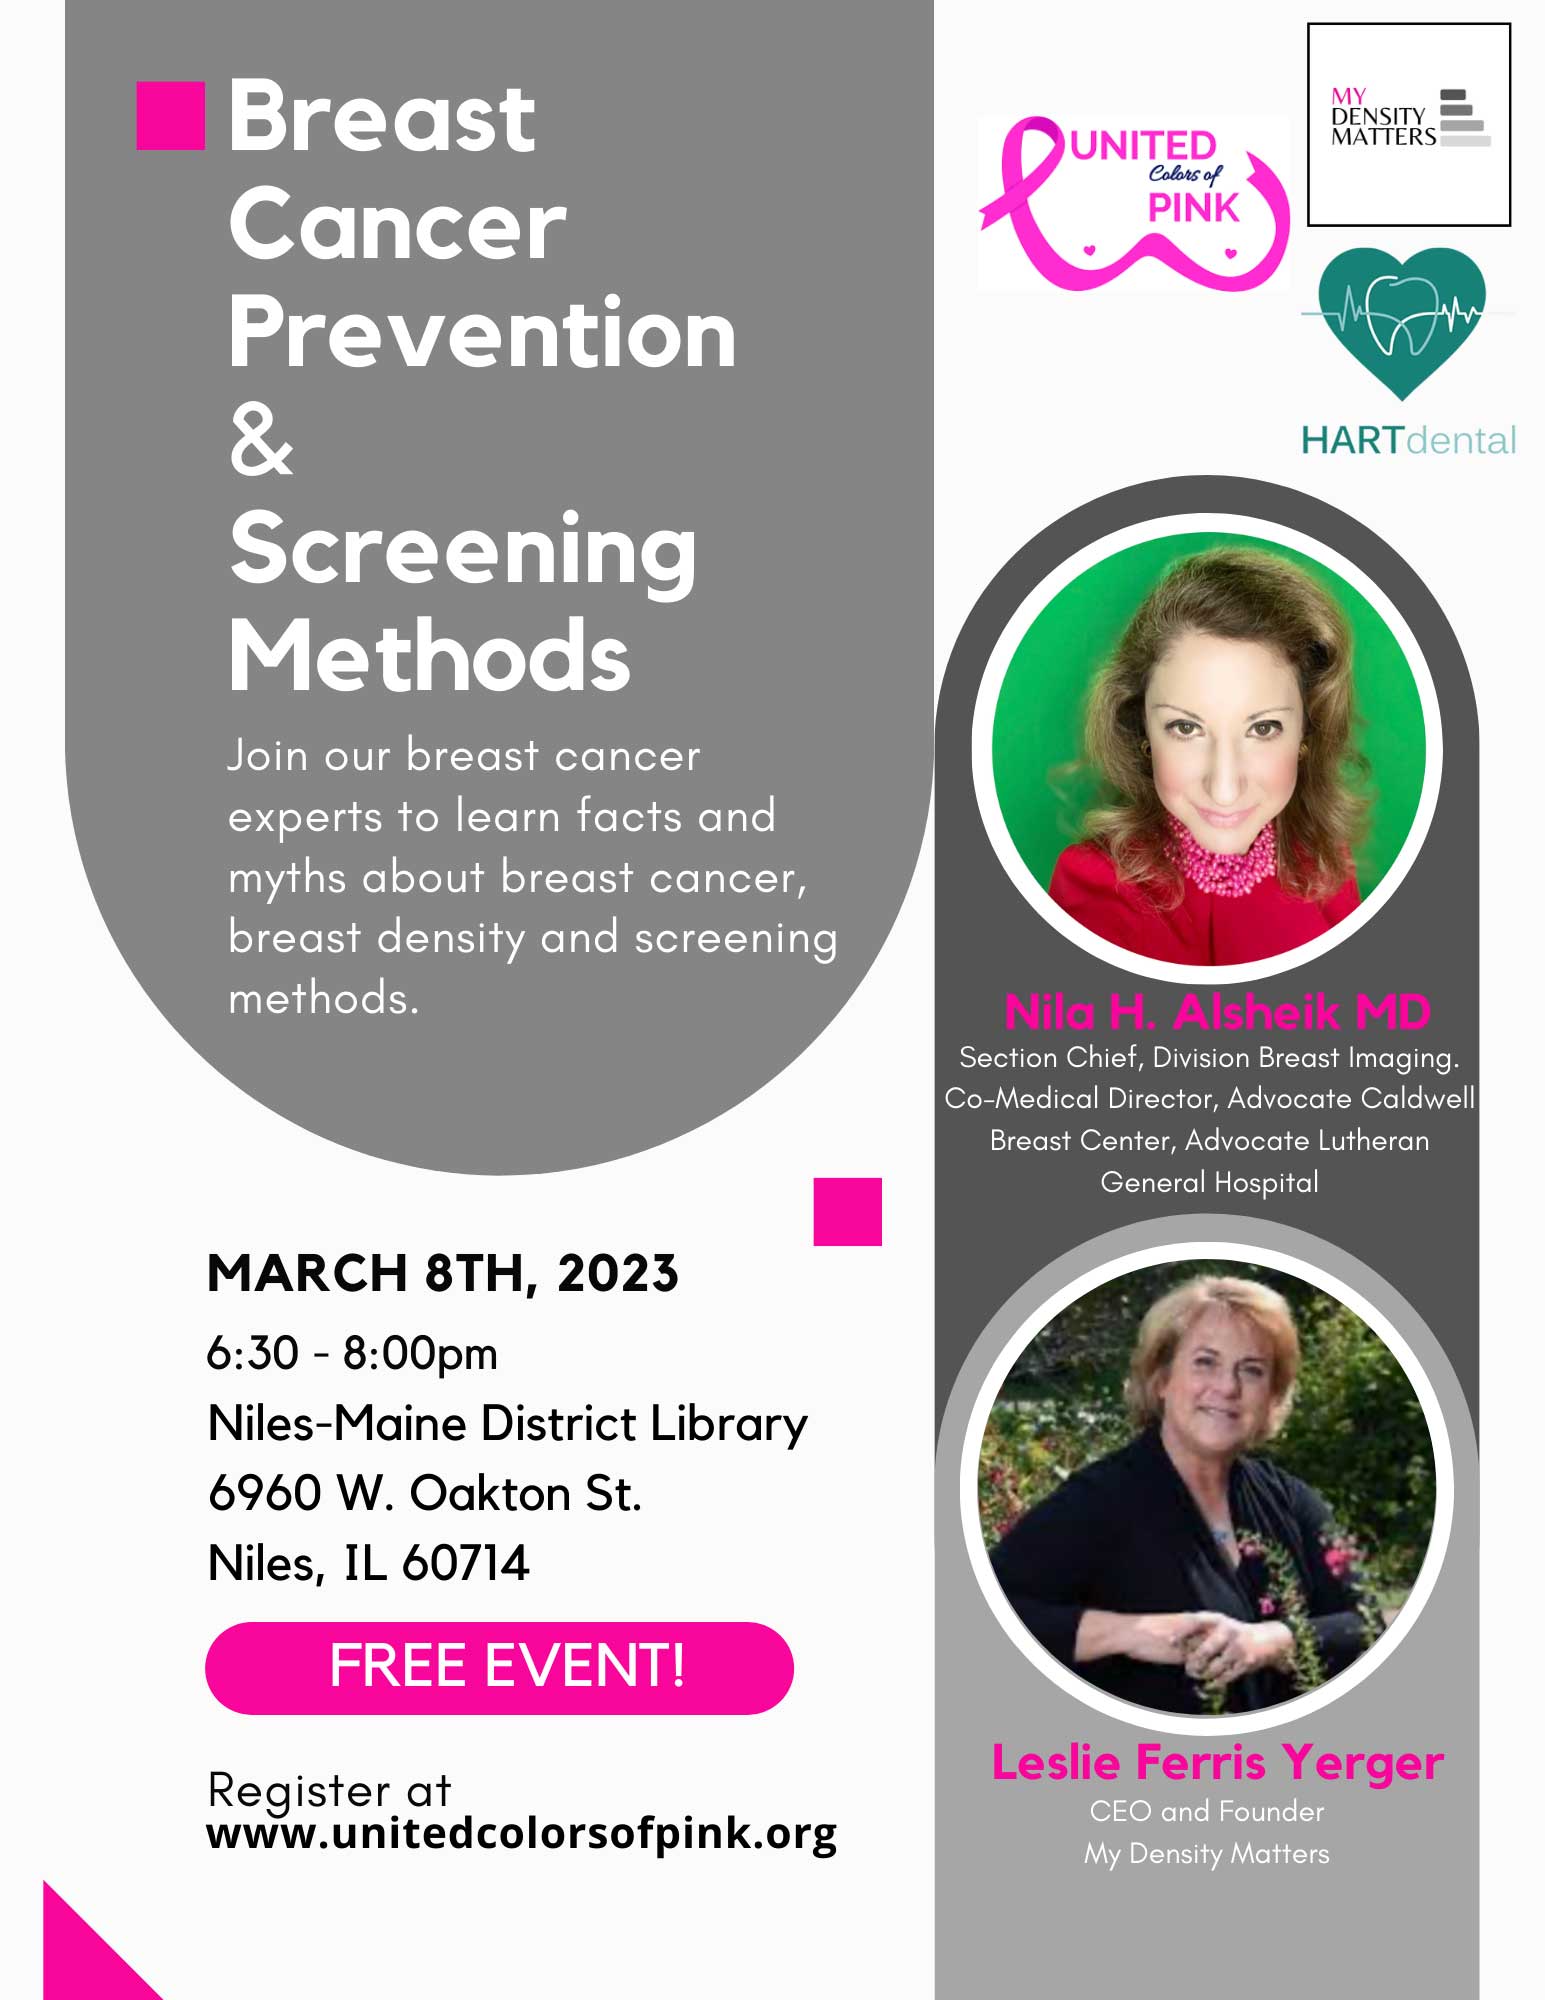 Breast Cancer Prevention Event - March 8, 2023